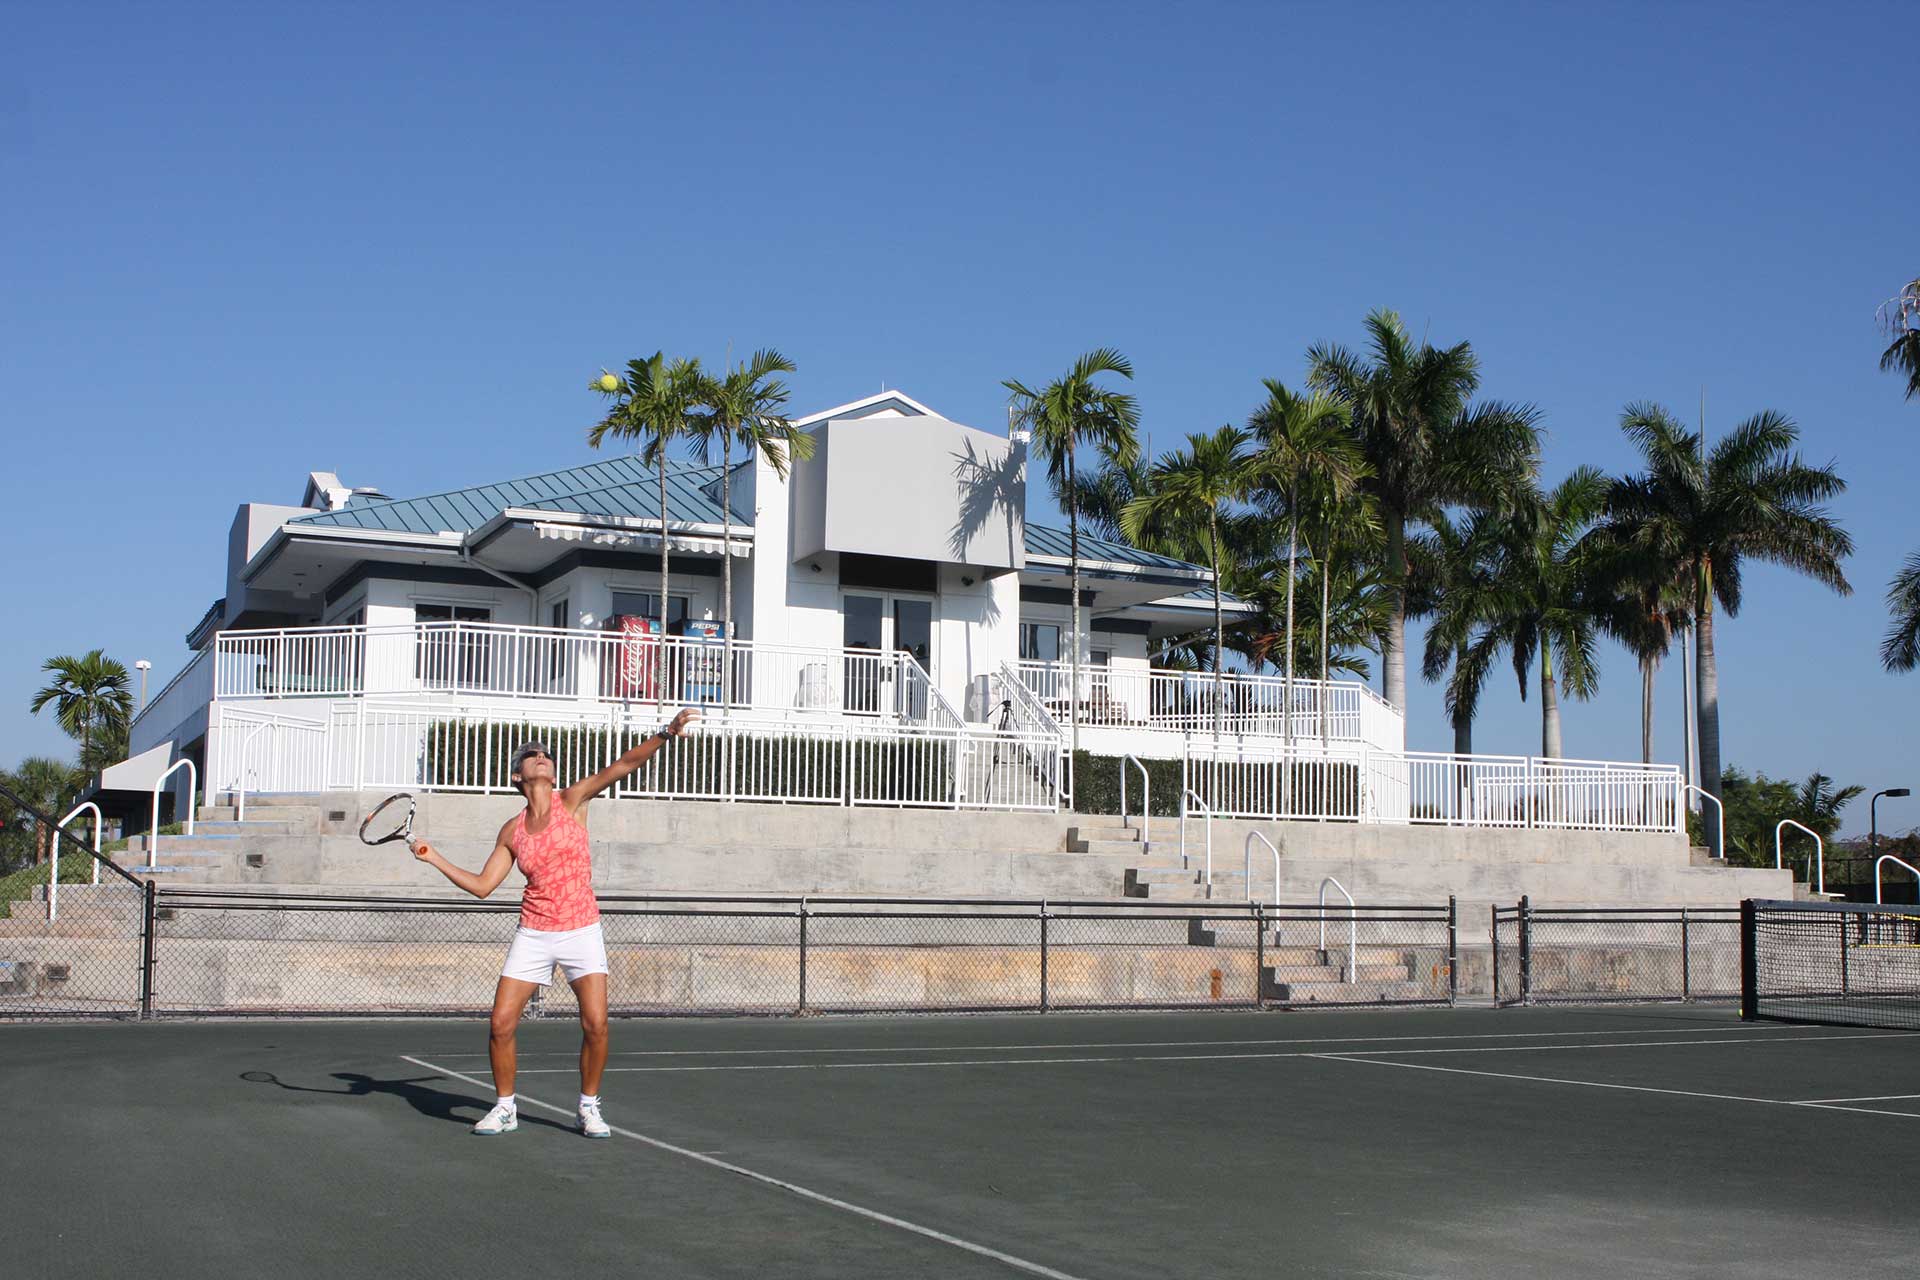 Tennis Center Club House and Court with Tennis Player